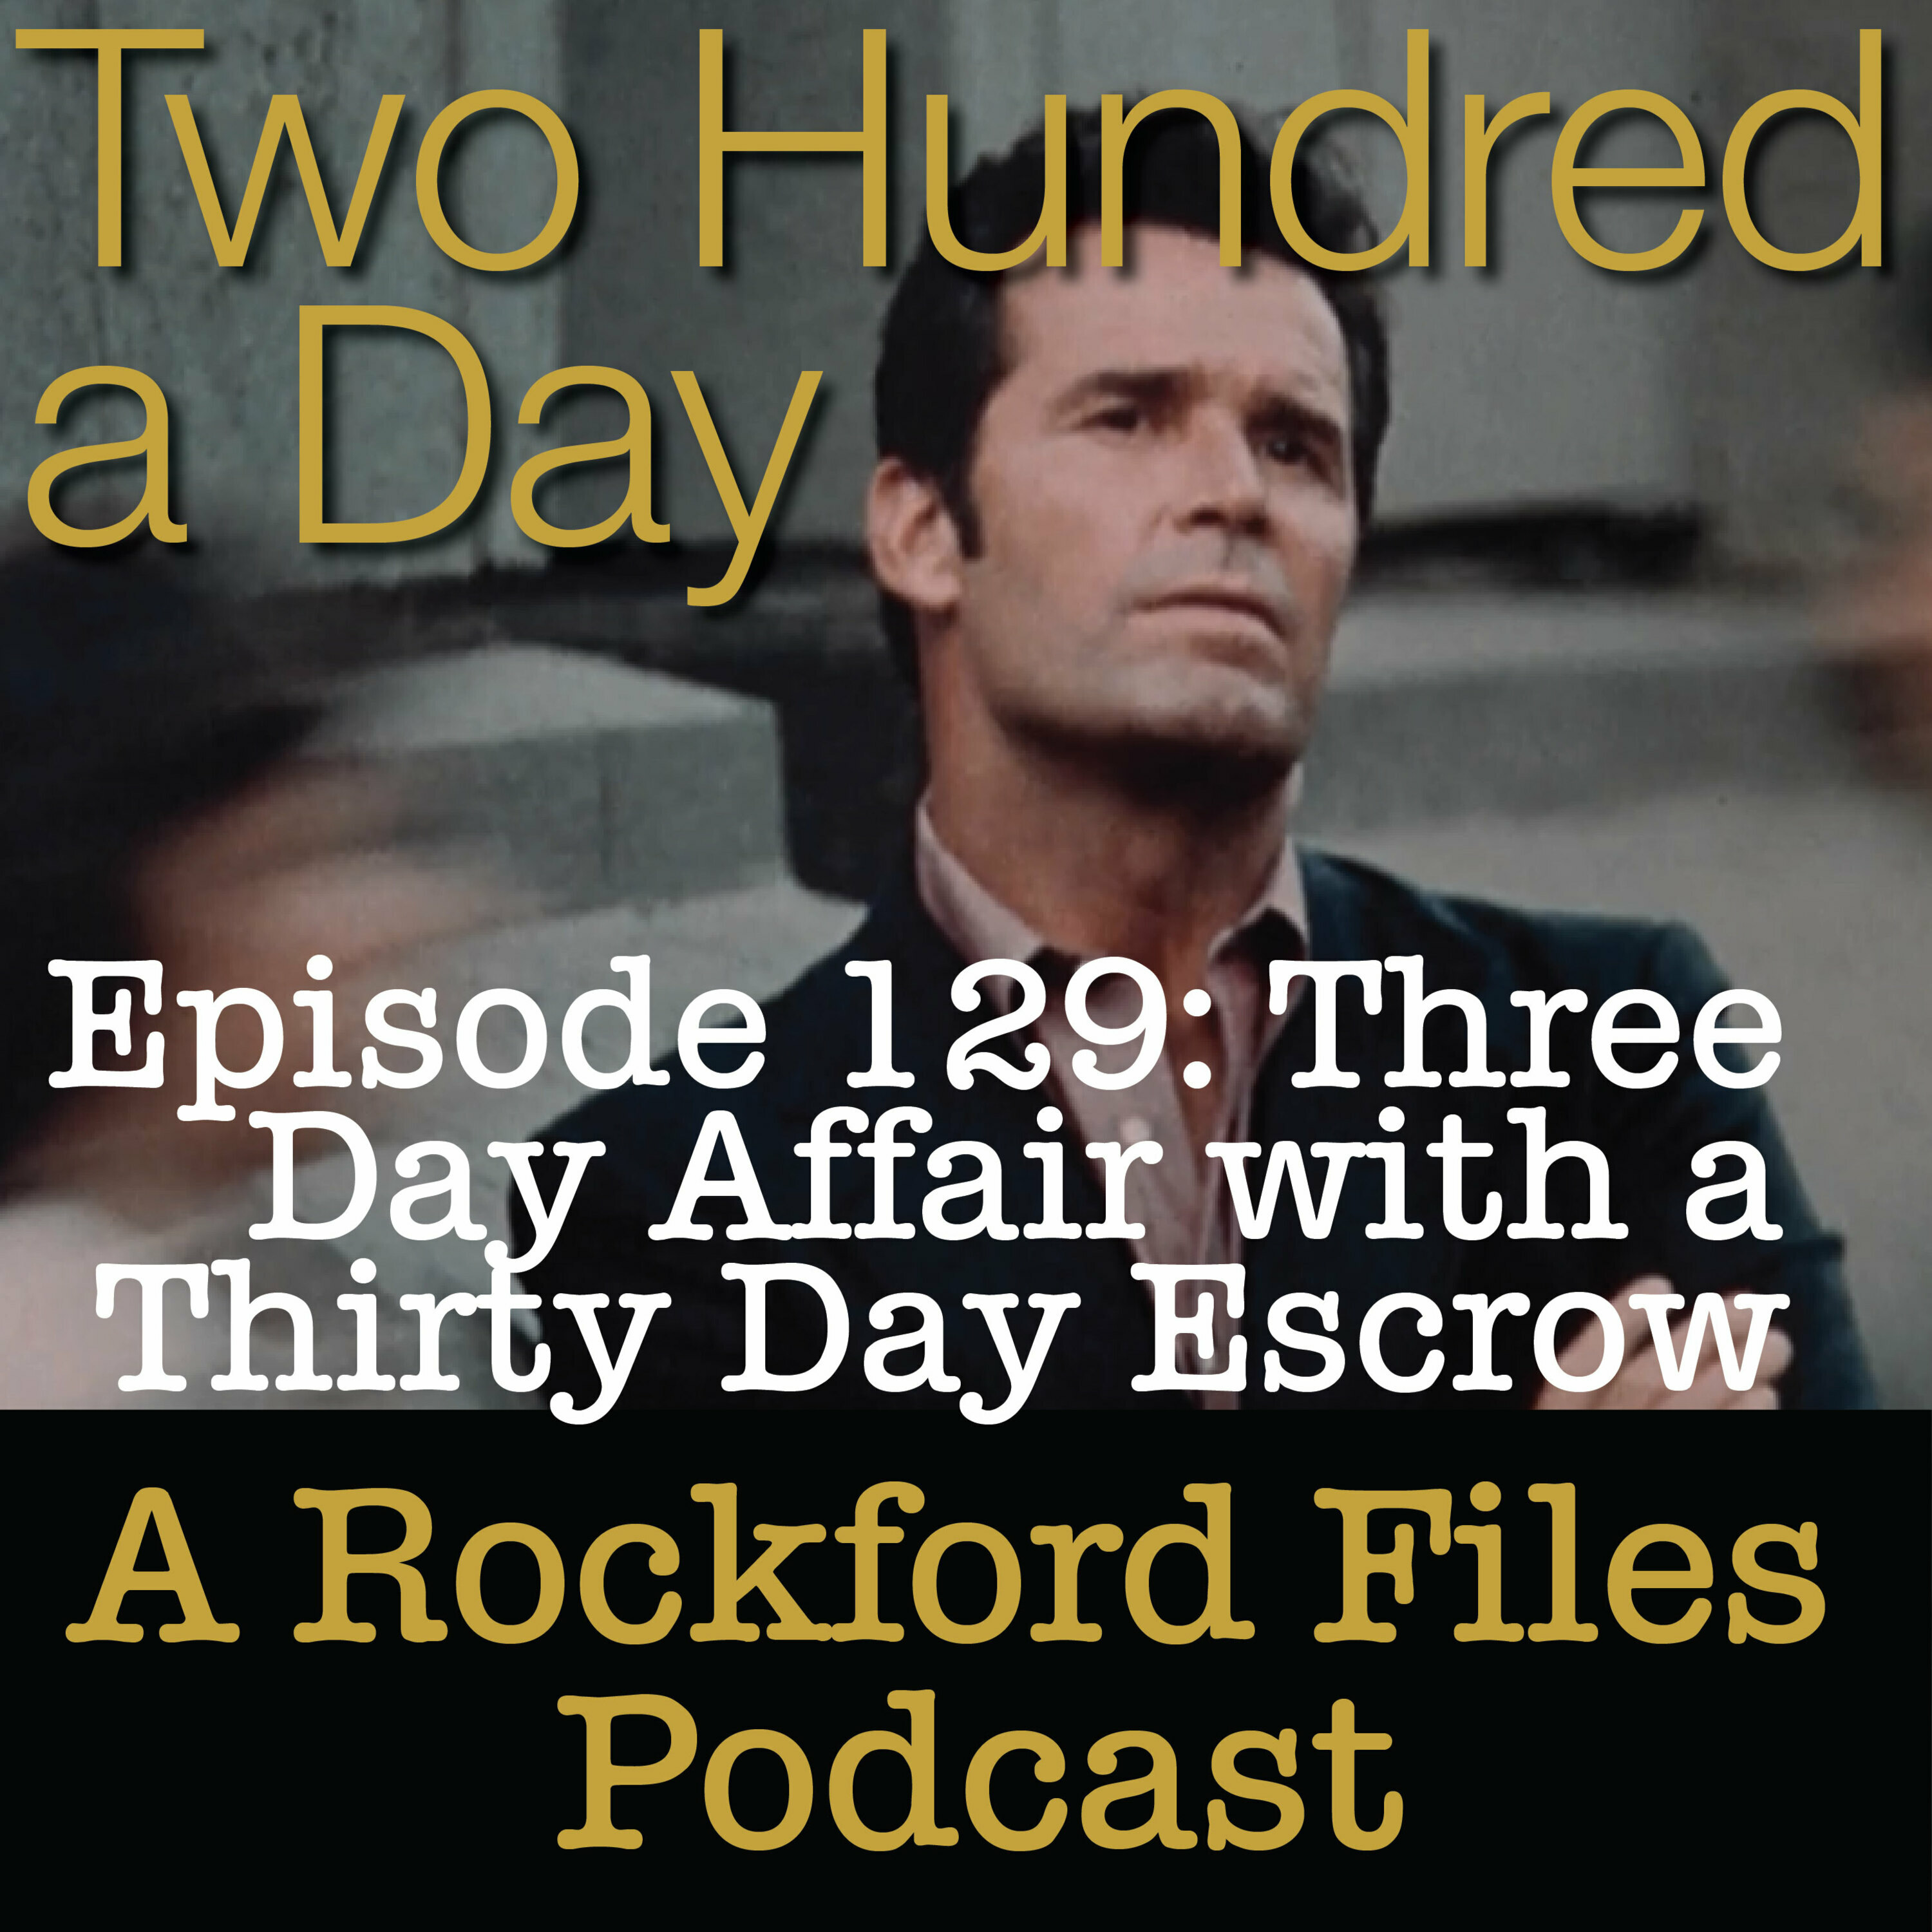 Episode 129: Three Day Affair with a Thirty Day Escrow